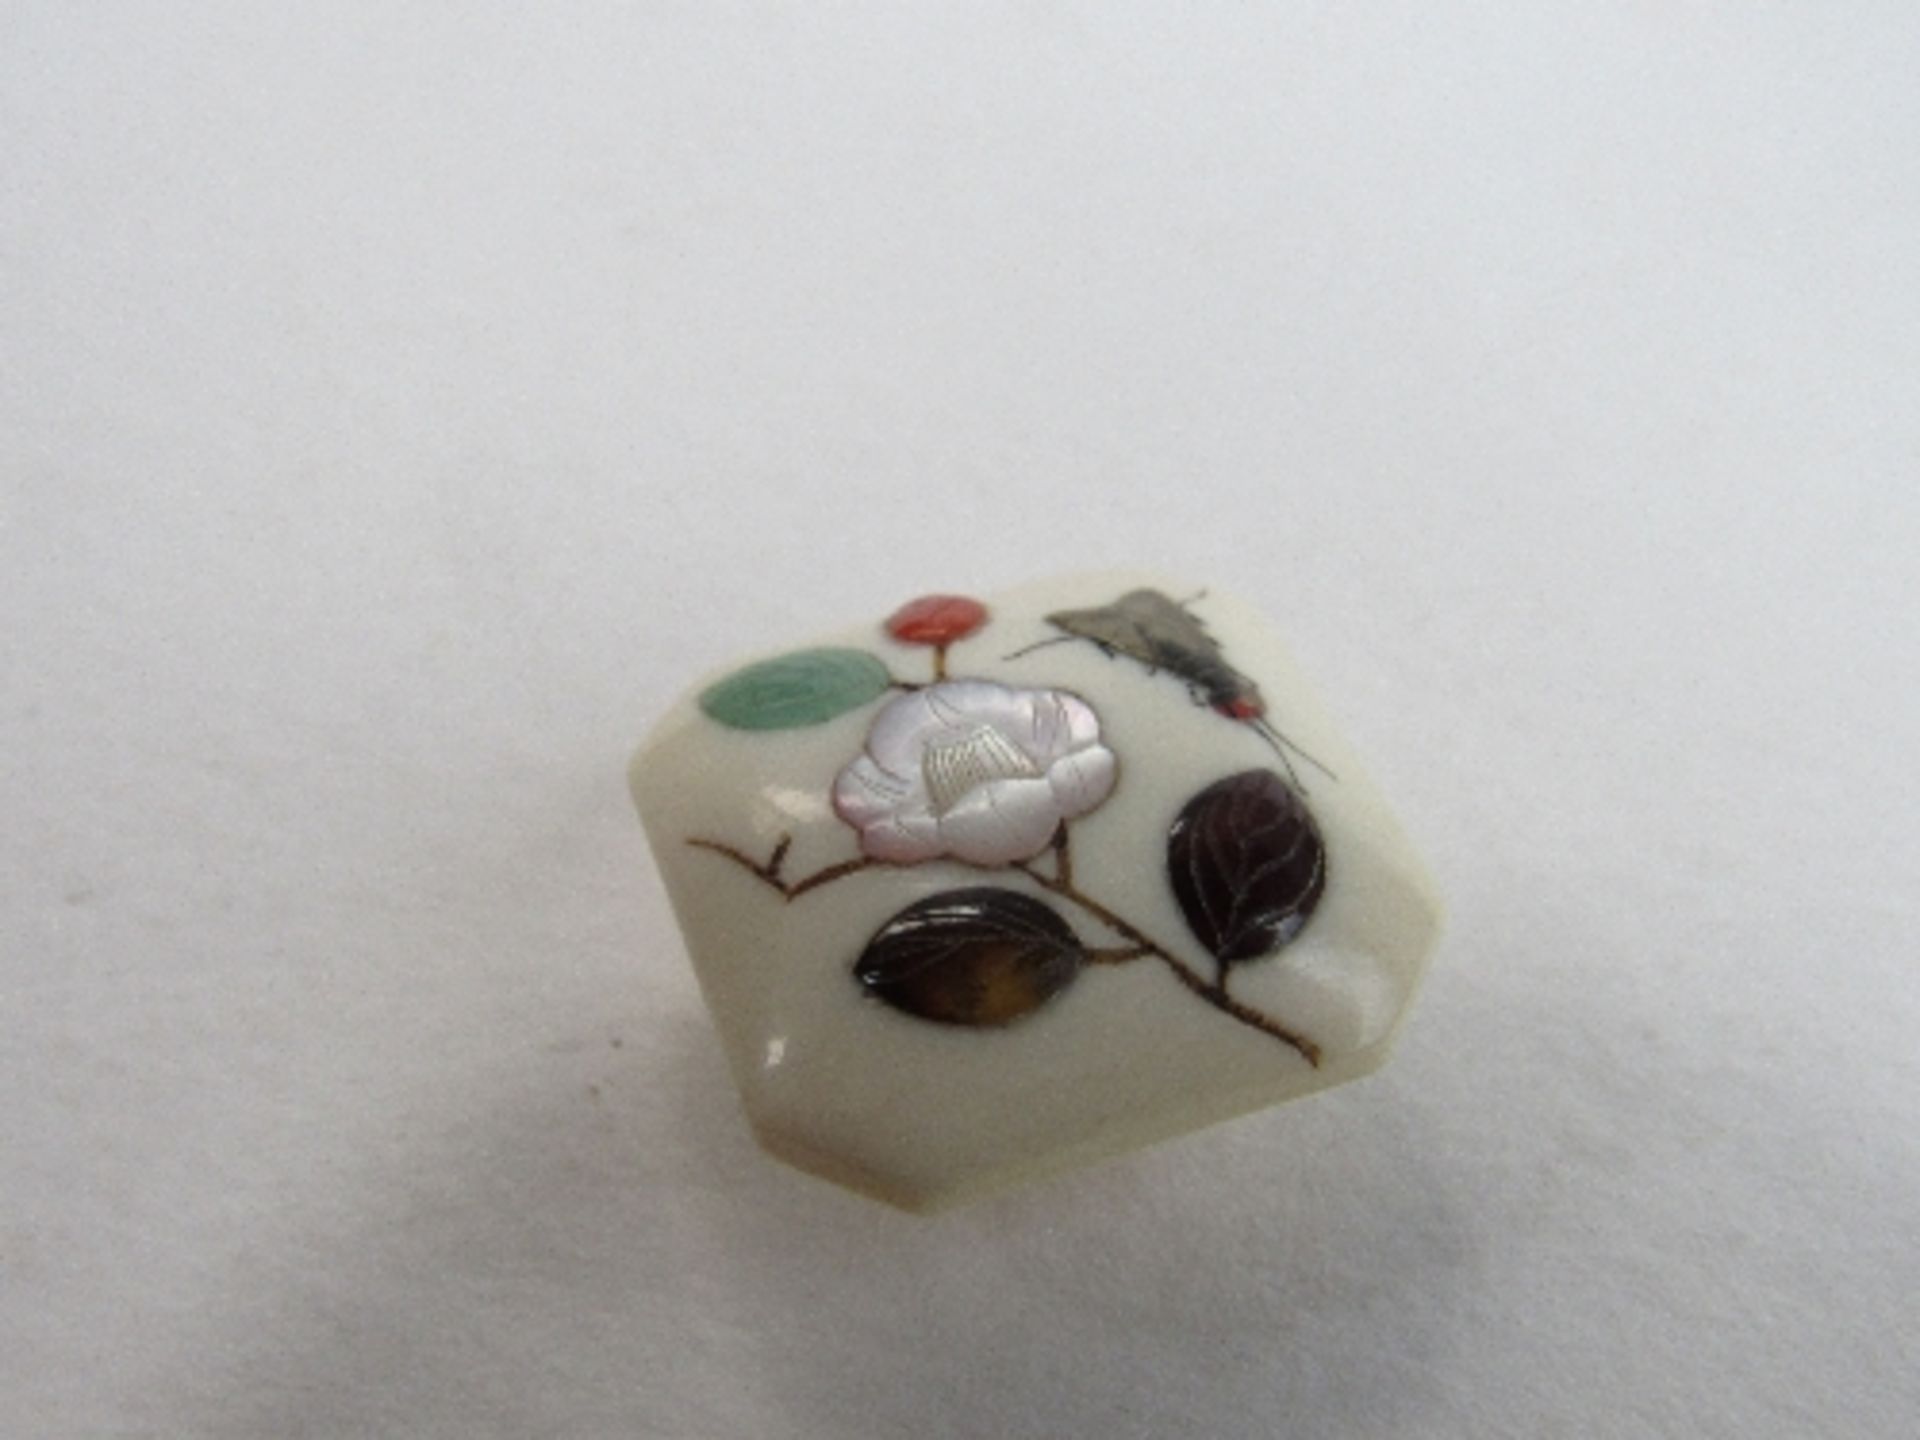 Square ivory button decorated with mother of pearl & stone inlay of flowers & insects - Image 2 of 2